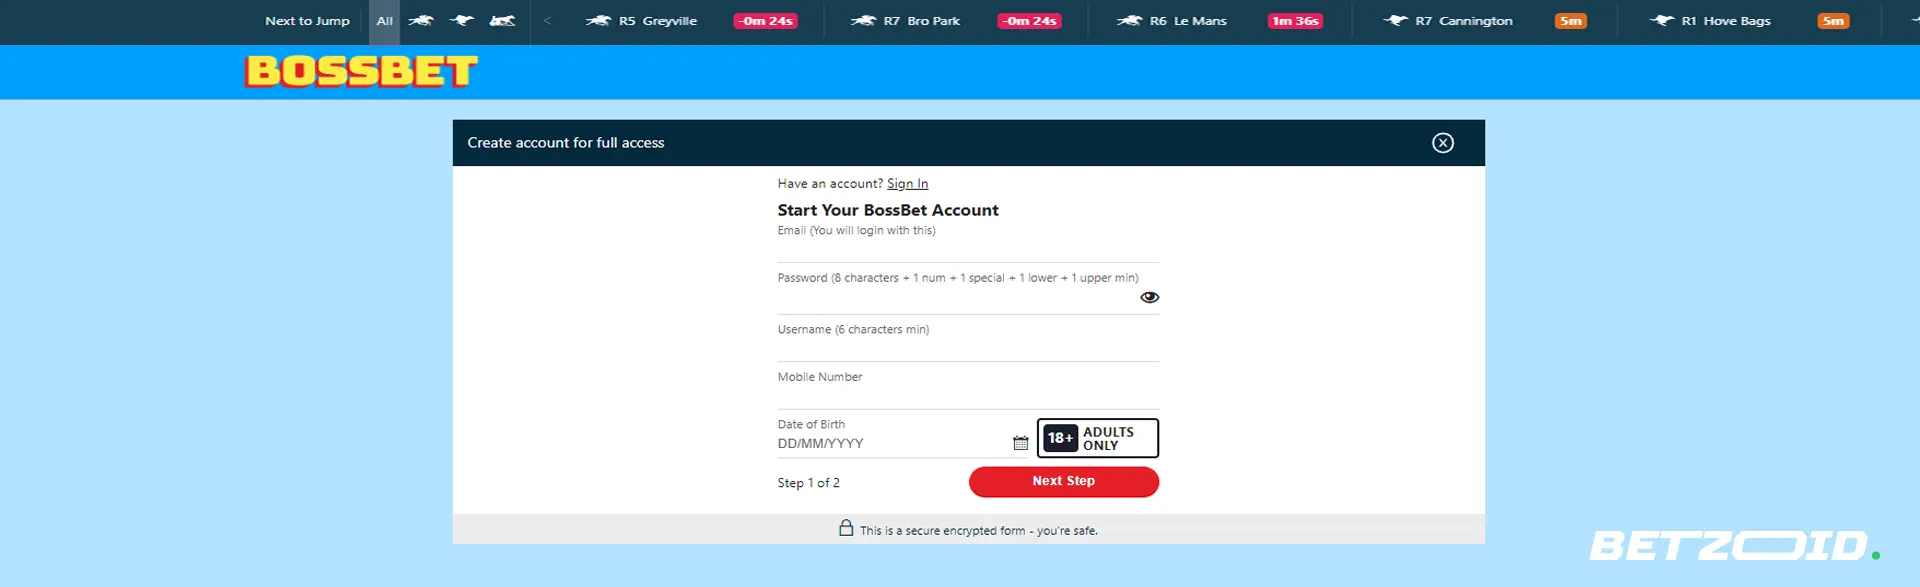 Bossbet sign up page for creating a new account.